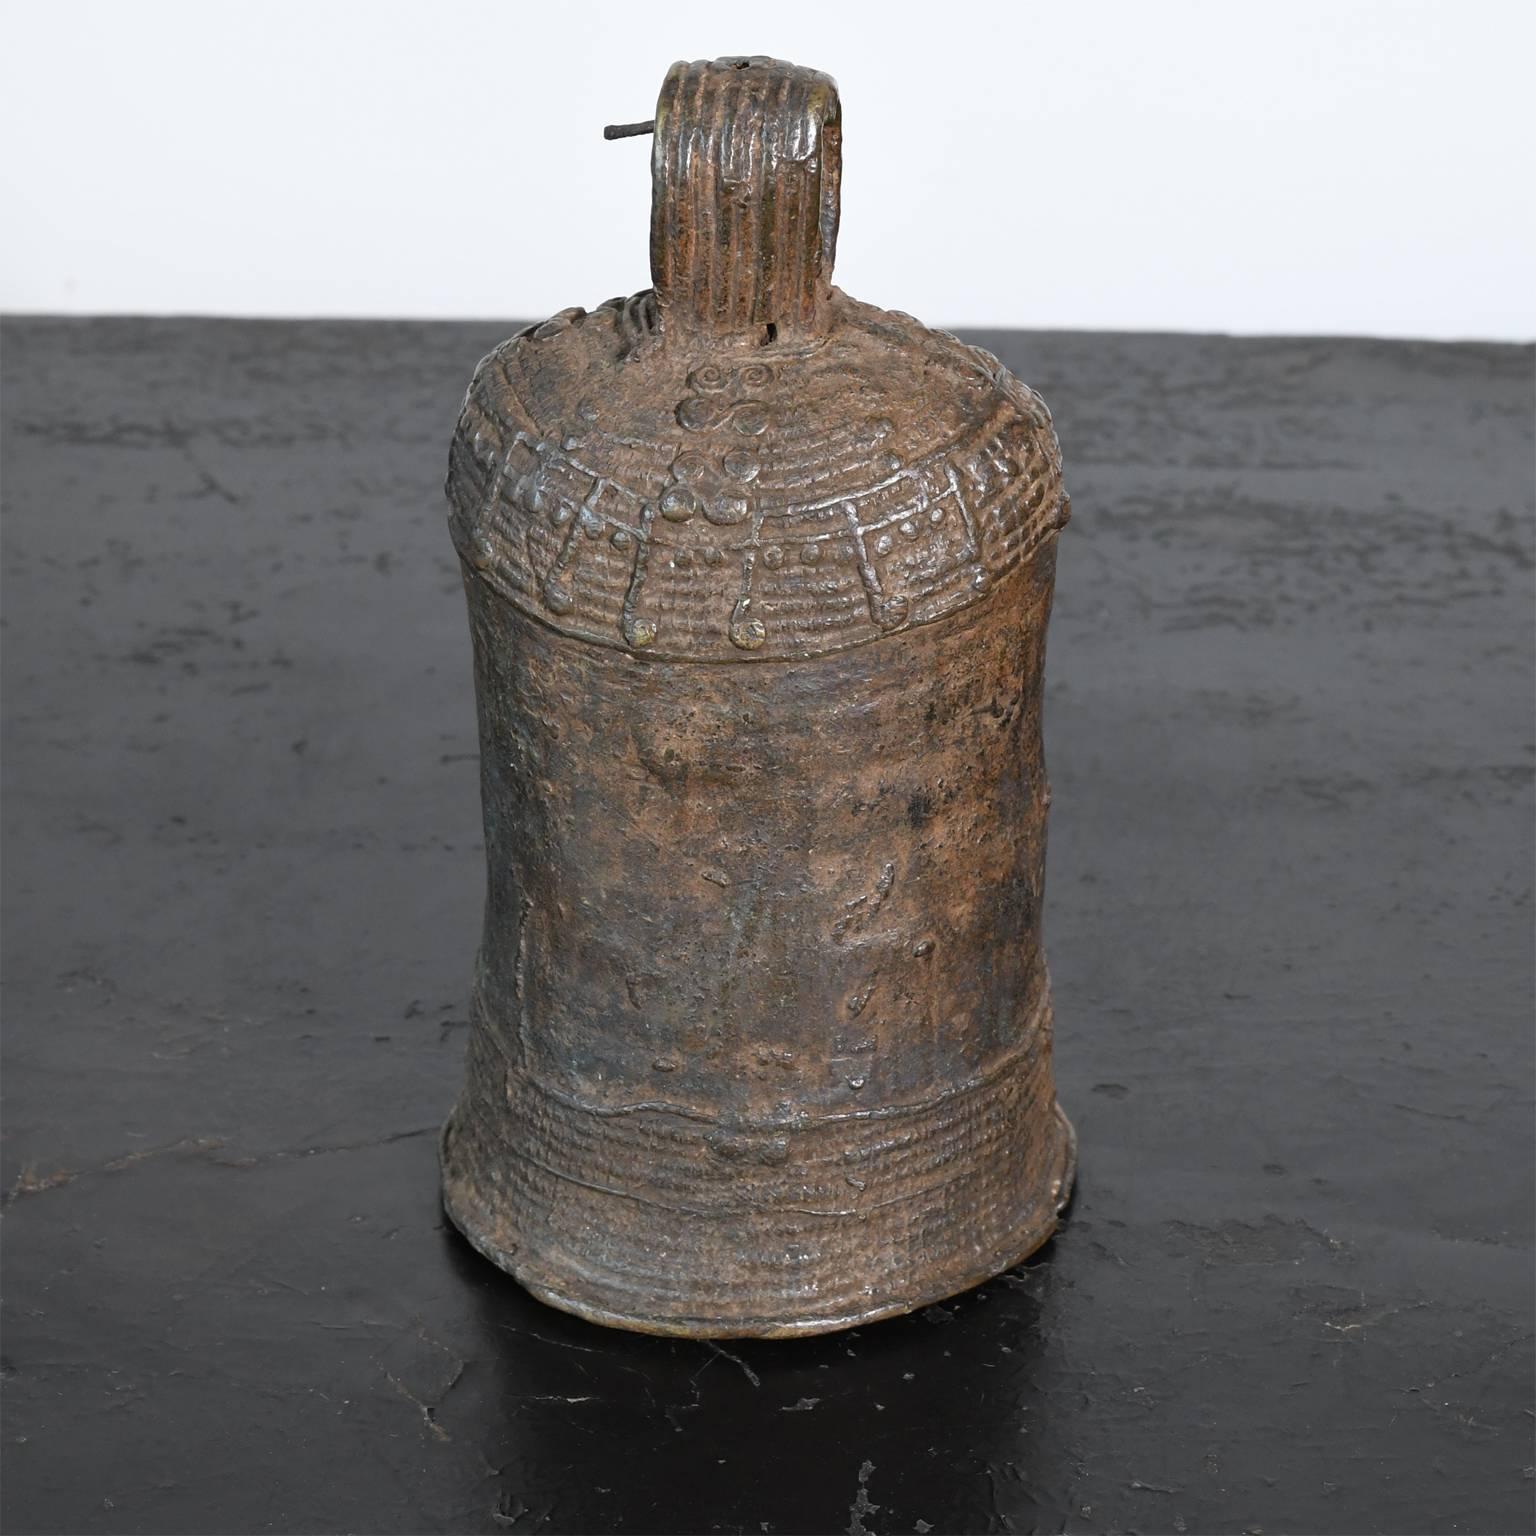 Traditional Tribal Art cast bronze bell from the Igbo People in West Africa. Made by the lost wax process by the Igbo or Igala metalsmiths. Africa tribal bells were used for a variety of purposes, such as proclaiming a sacred presence as well as a